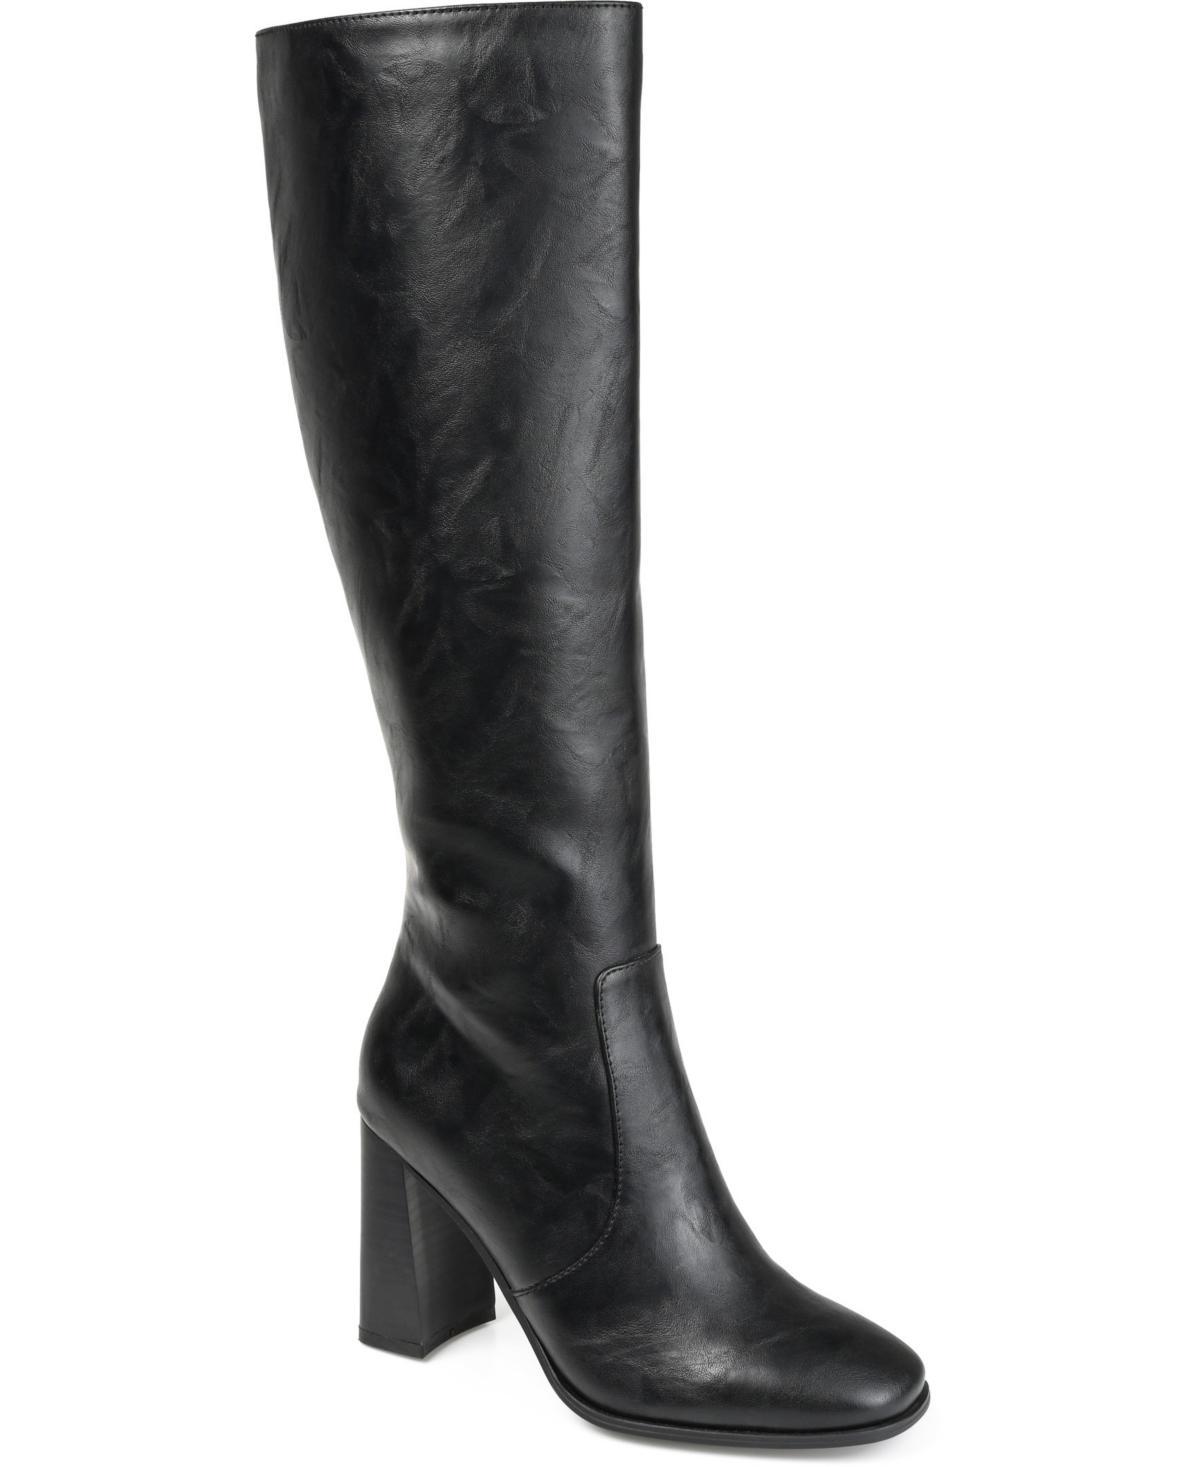 Journee Collection Karima Womens Knee-High Boots Natural Product Image